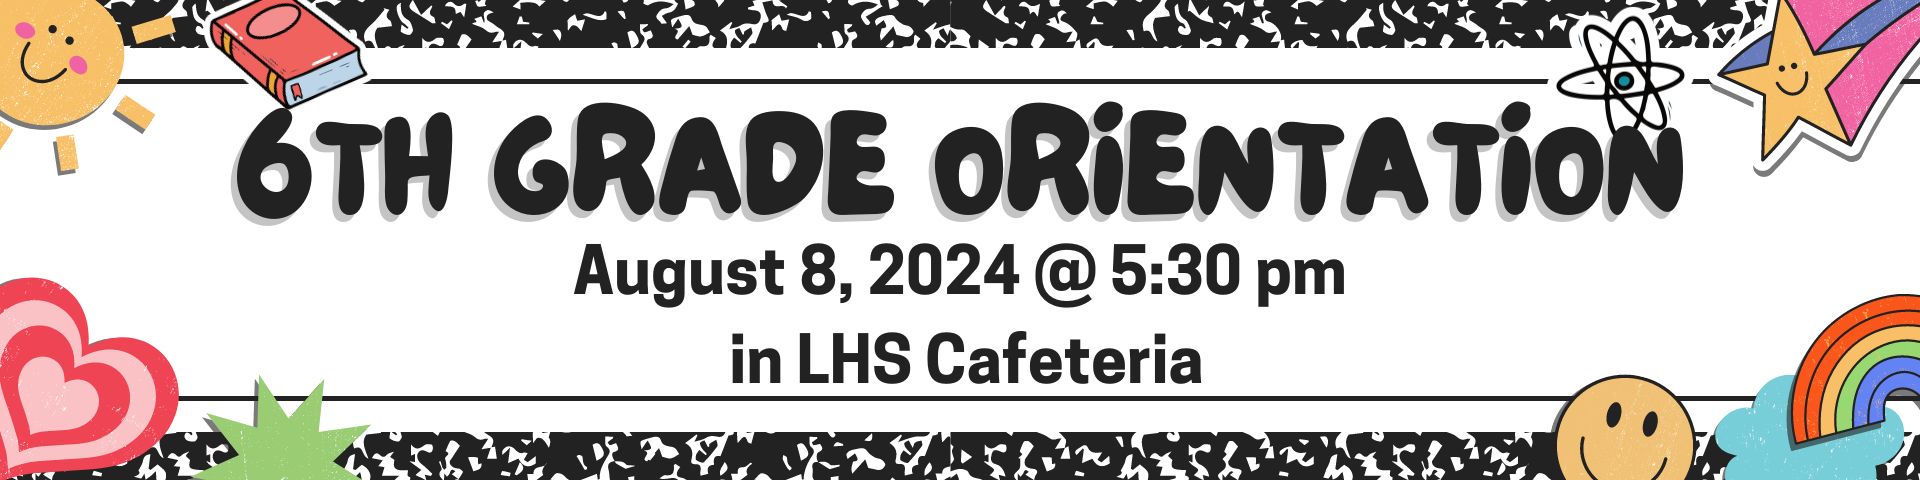 6th Grade Orientation August 8, 2024 @ 5:30pm in LHS Cafeteria